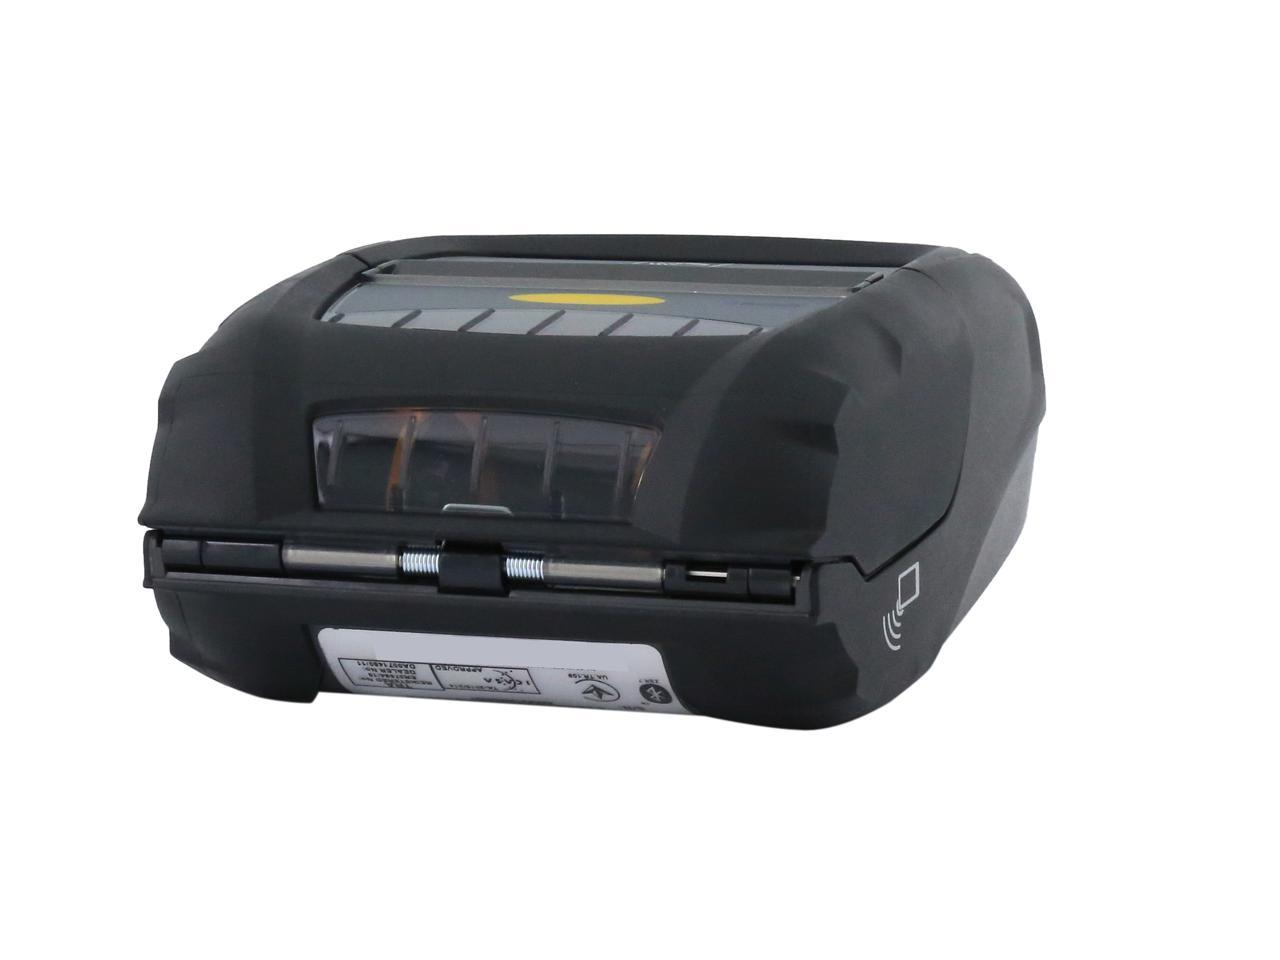 Zebra Zq510 3 Mobile Direct Thermal Receipt And Label Printer 203 Dpi Bluetooth 40 Linered 3772